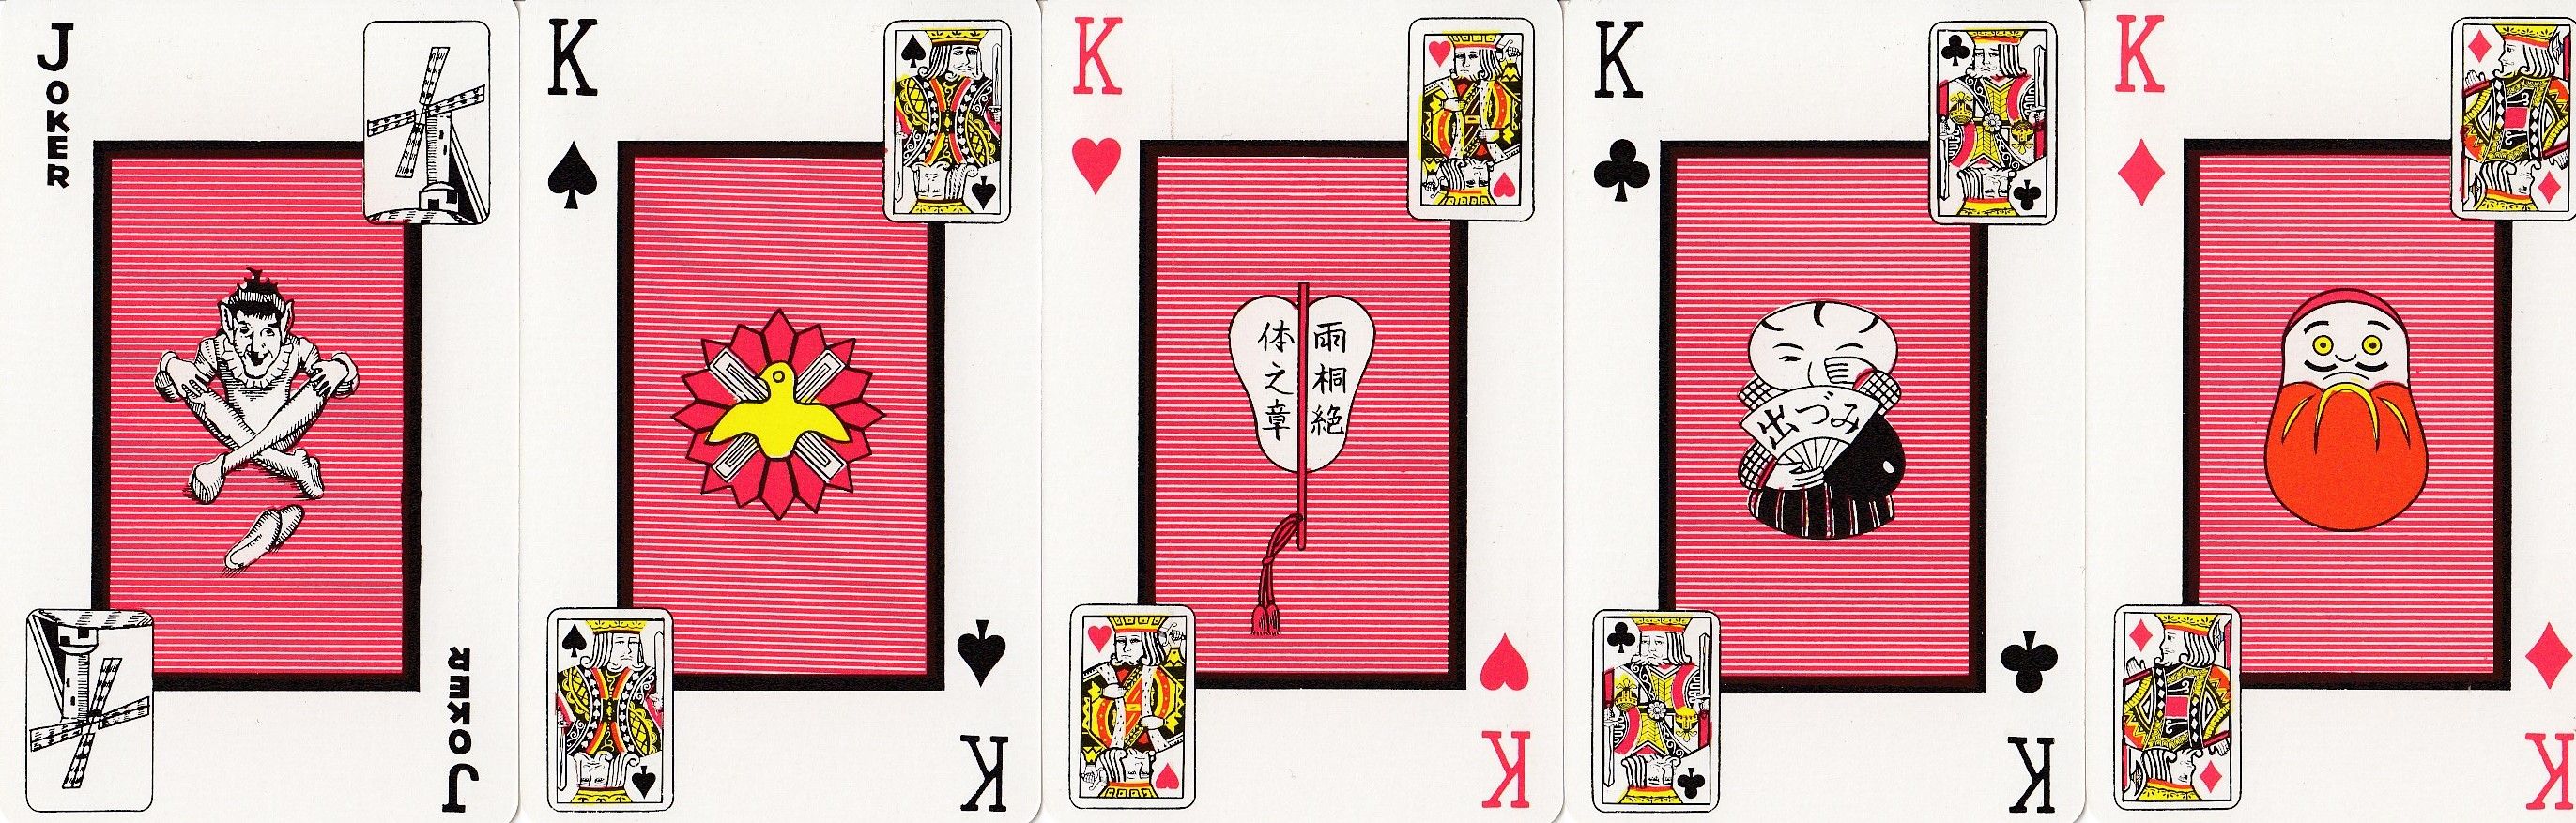 Five cards, one a joker and the other four being kings with various objects depicted.